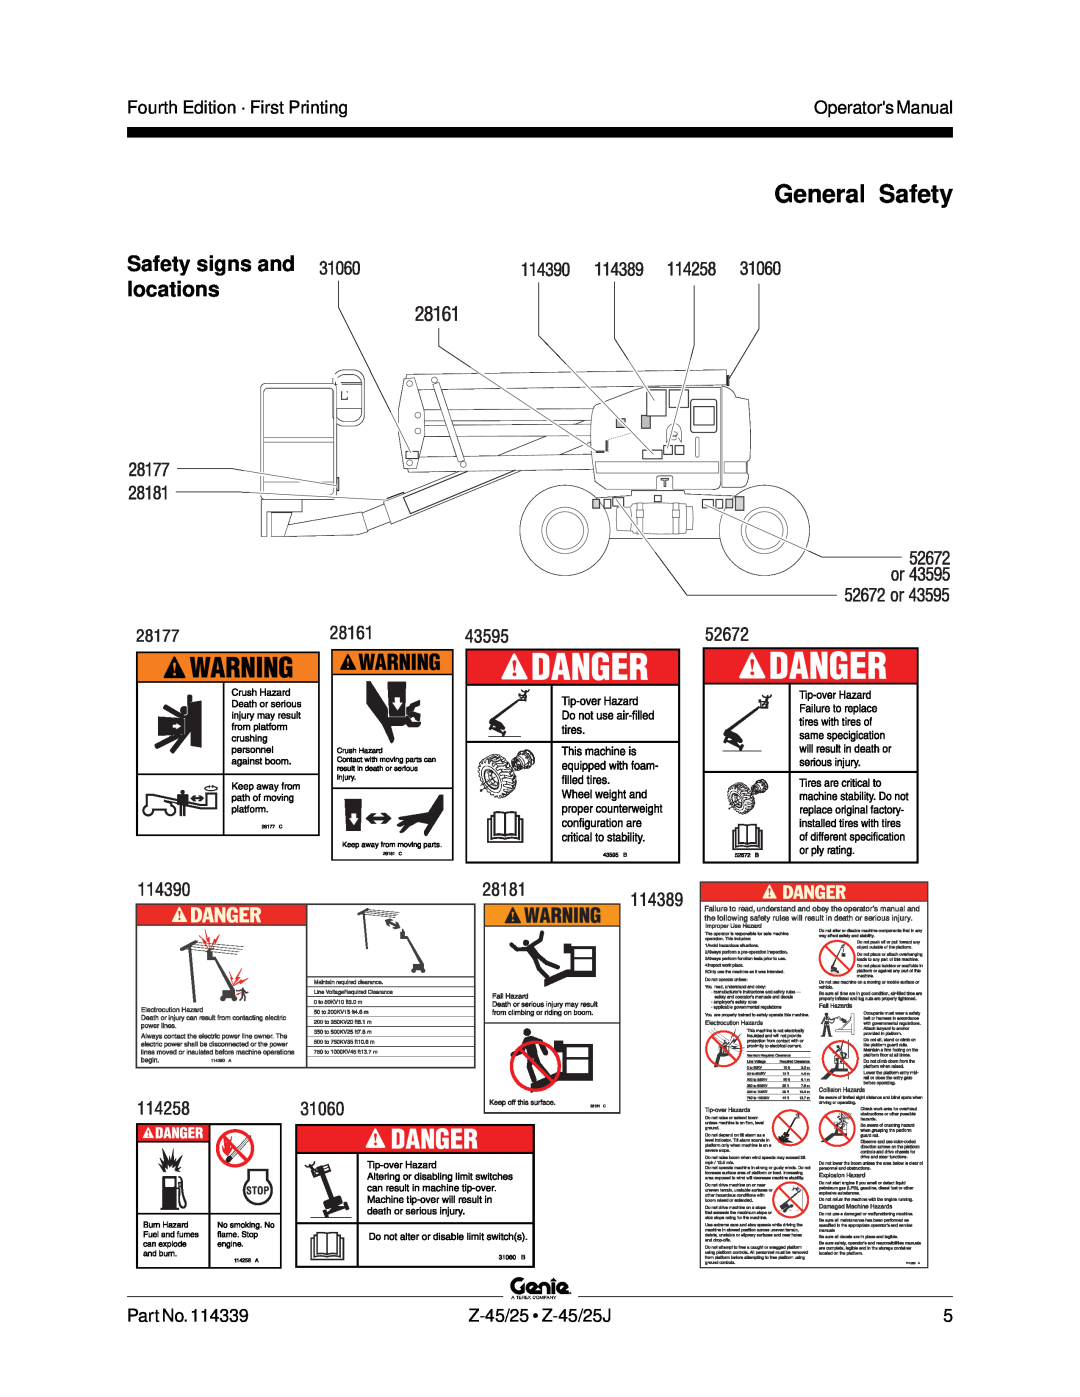 Genie Z-45, Z-25J manual General Safety, Safety signs and locations 